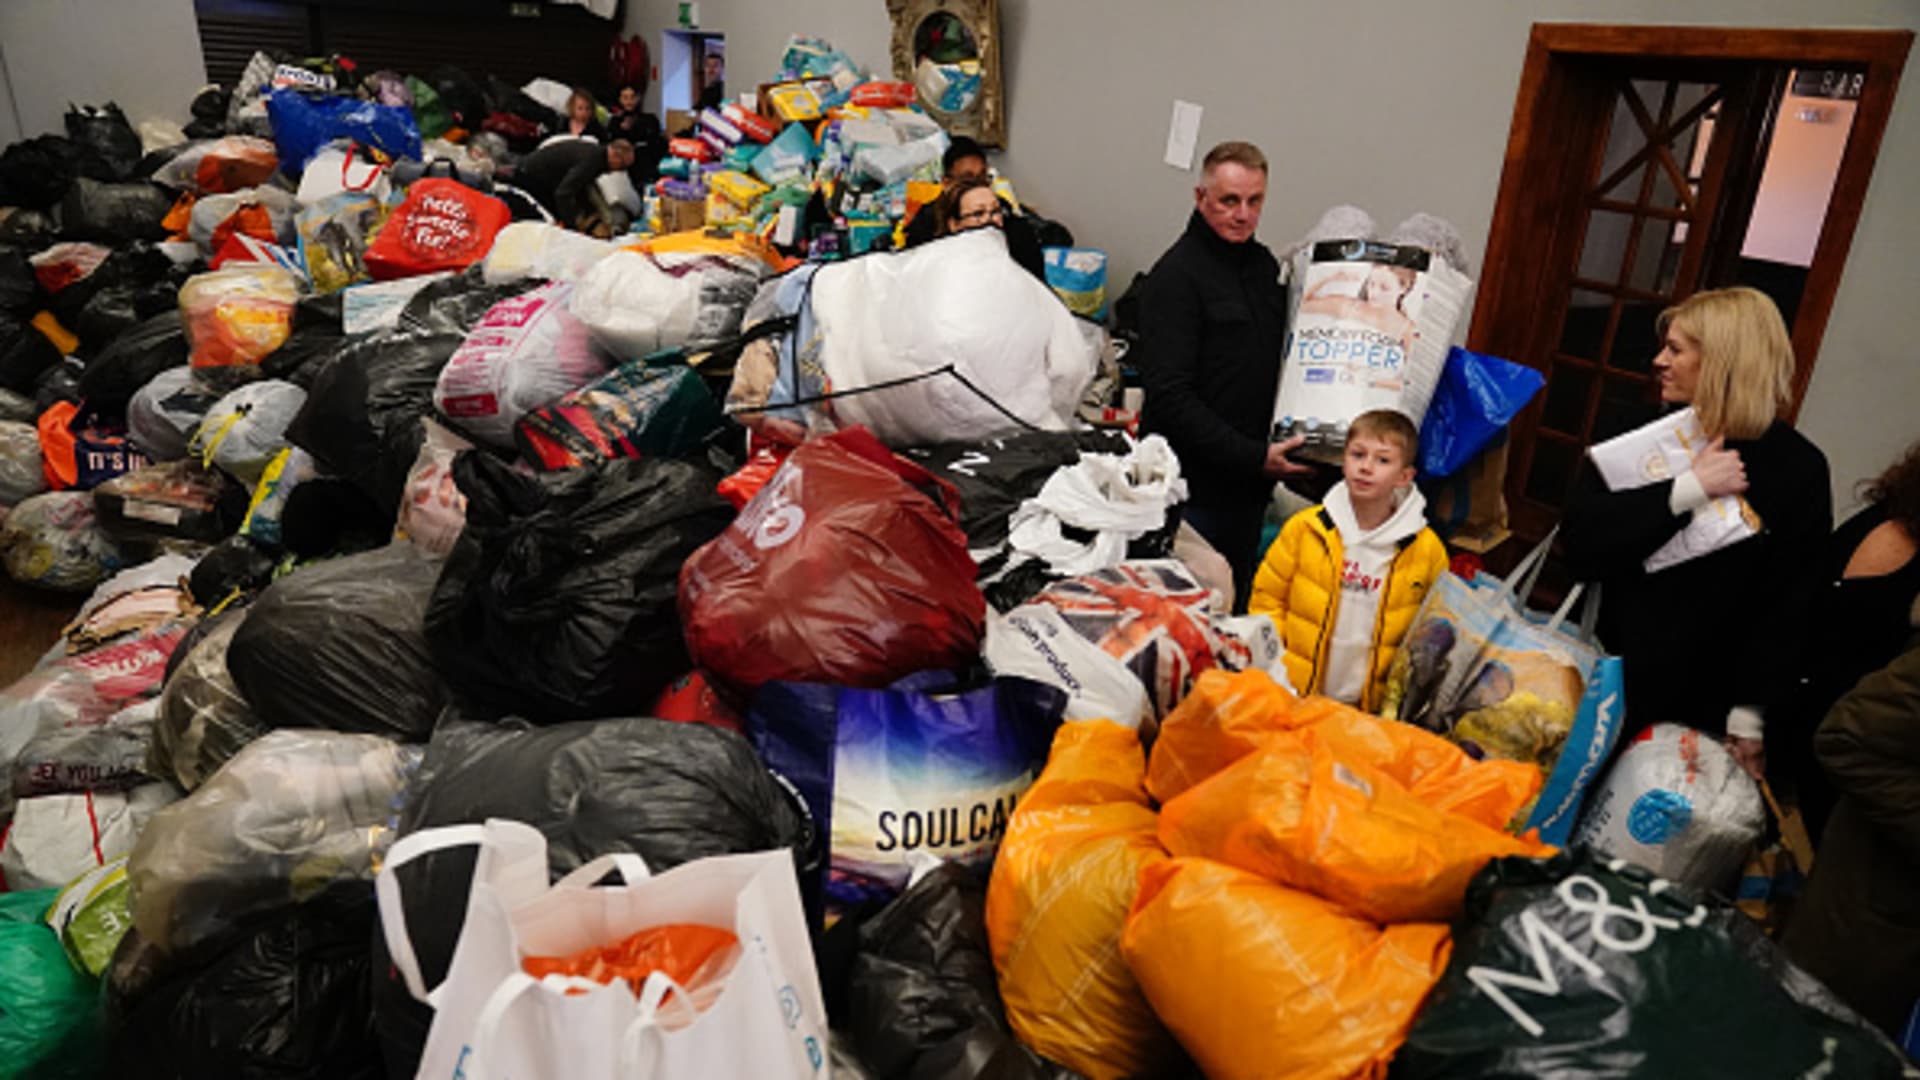 Members of the public drop off donations of aid for Ukrainian refugees at the Klub Orla Bialegoin Balham, south London, where it will be sorted before delivery overseas to those fleeing Ukraine following the Russian invasion.